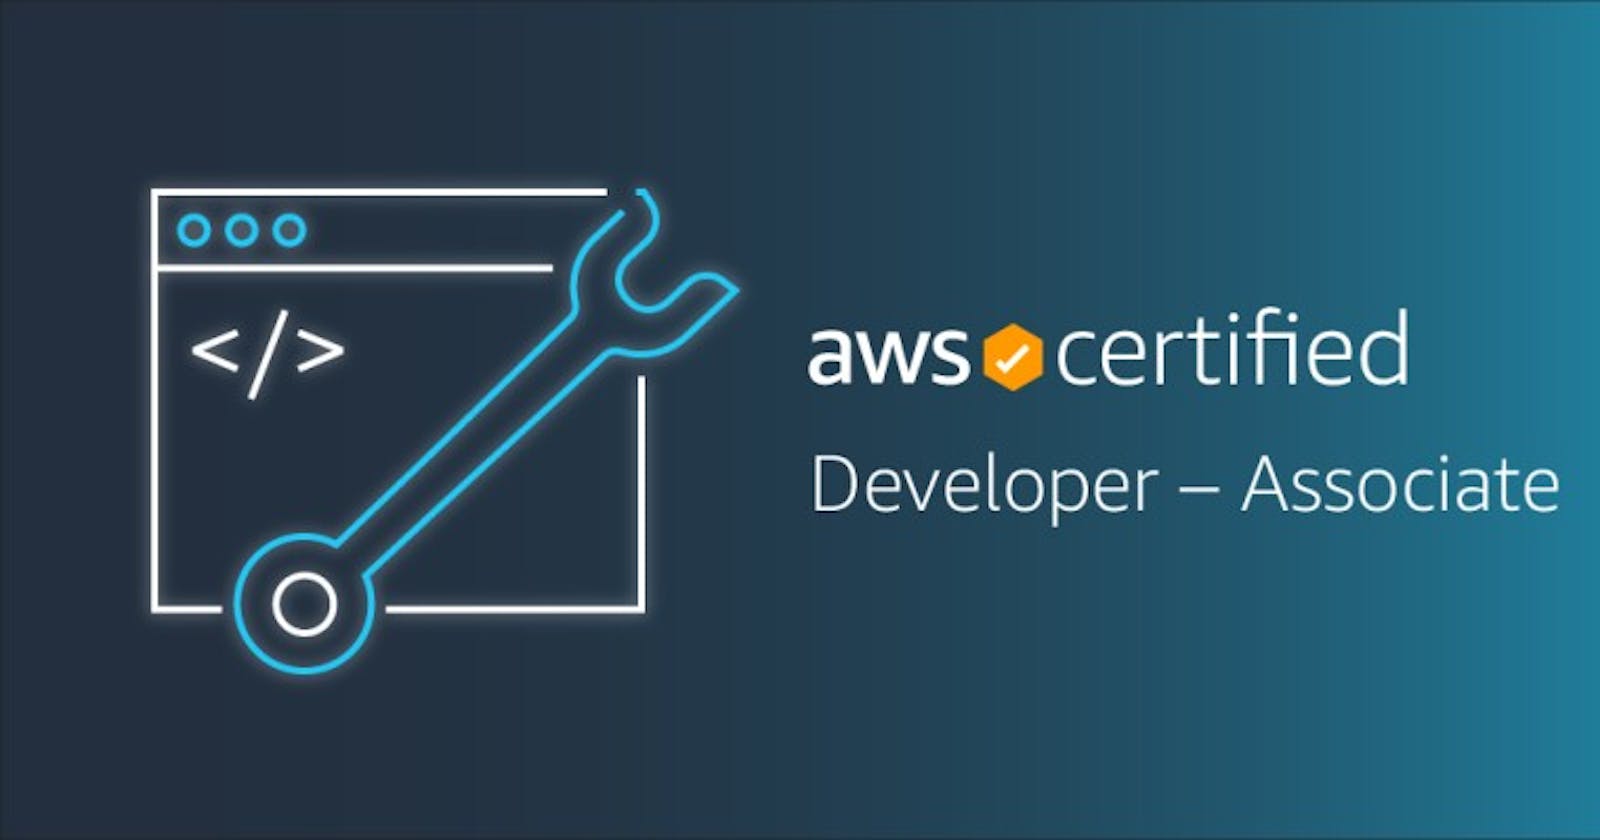 AWS Certifications: Are They Worth It? Should You Get One?